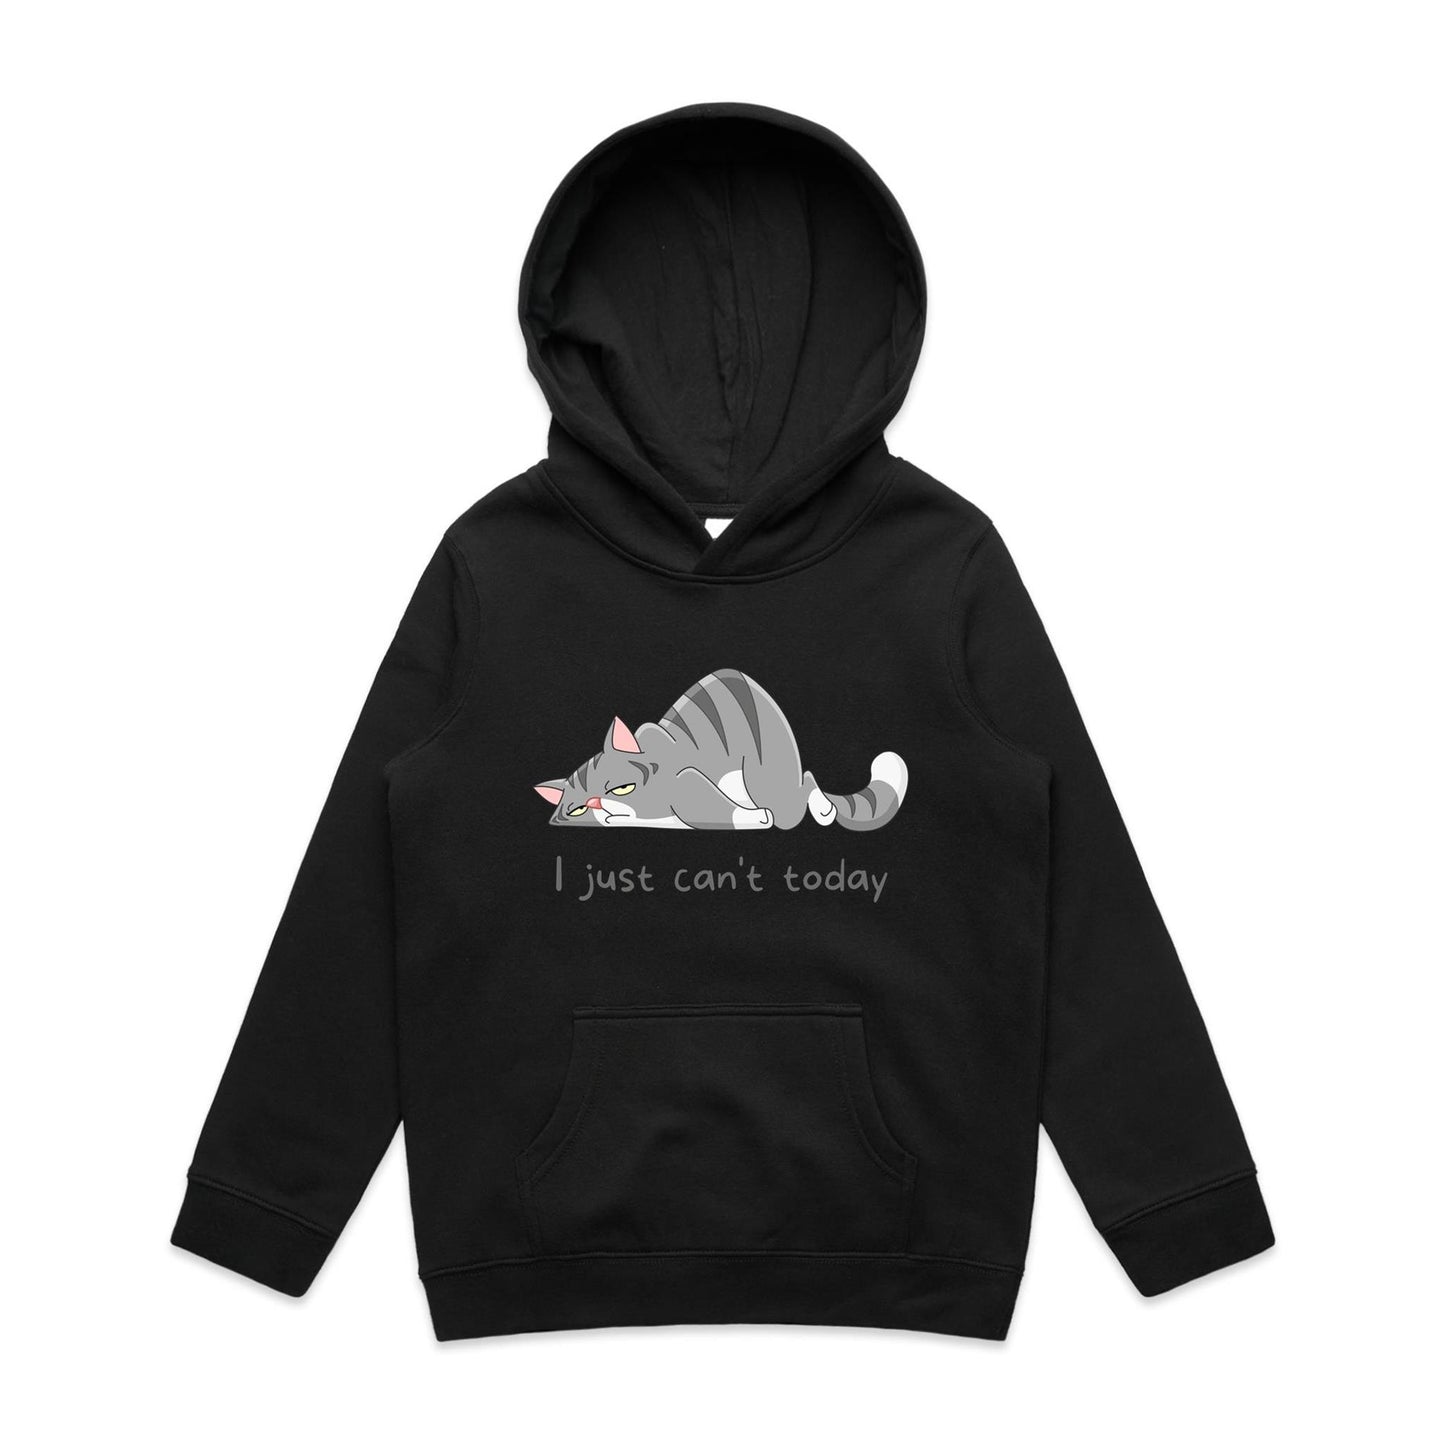 Cat, I Just Can't Today - Youth Supply Hood Black Kids Hoodie animal